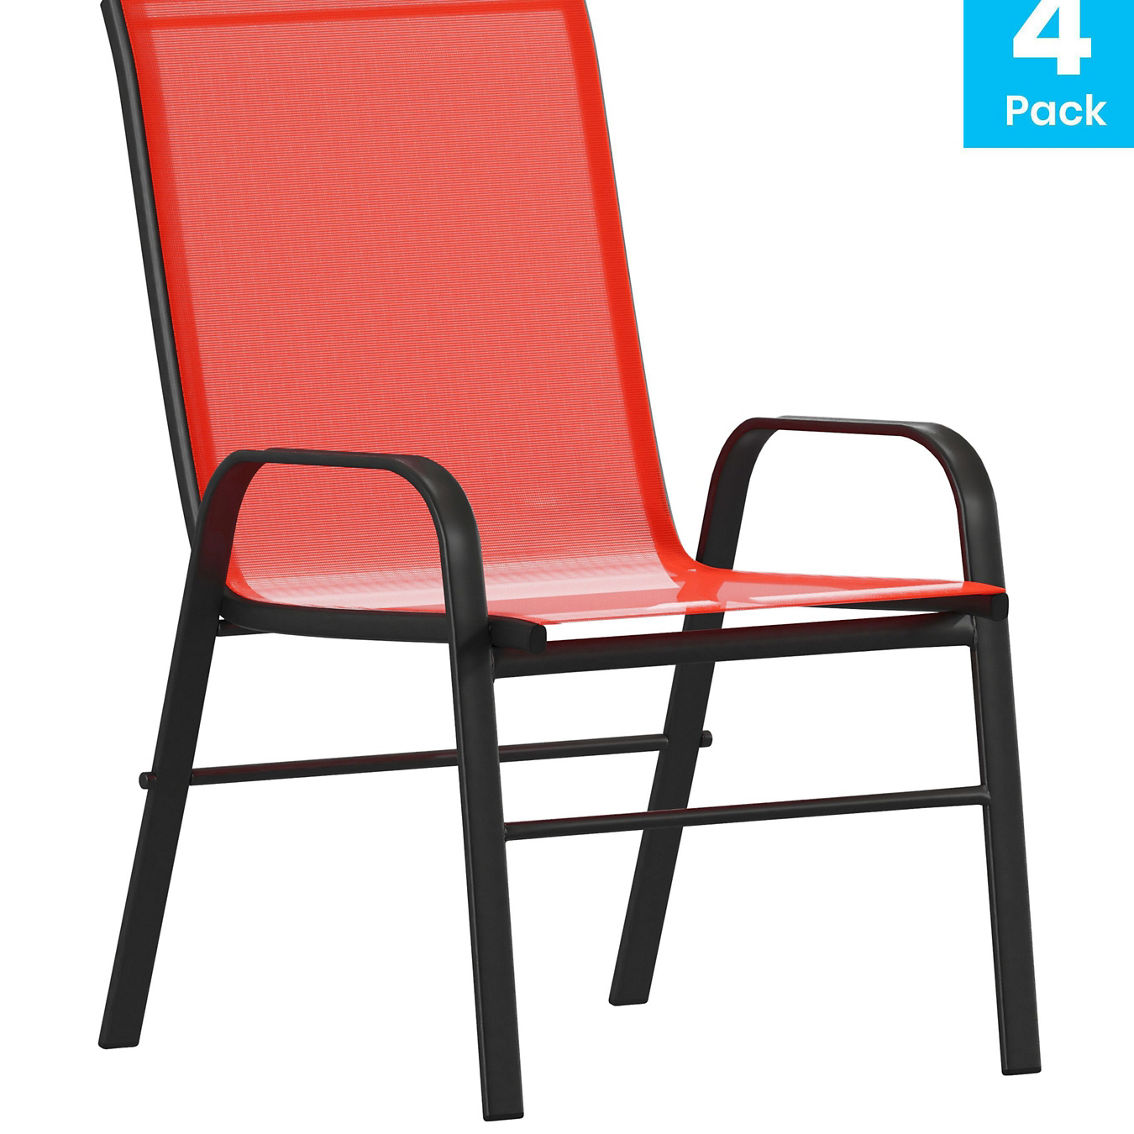 Flash Furniture 4 Pack Outdoor Stack Chair w/ Flex Material - Image 4 of 5